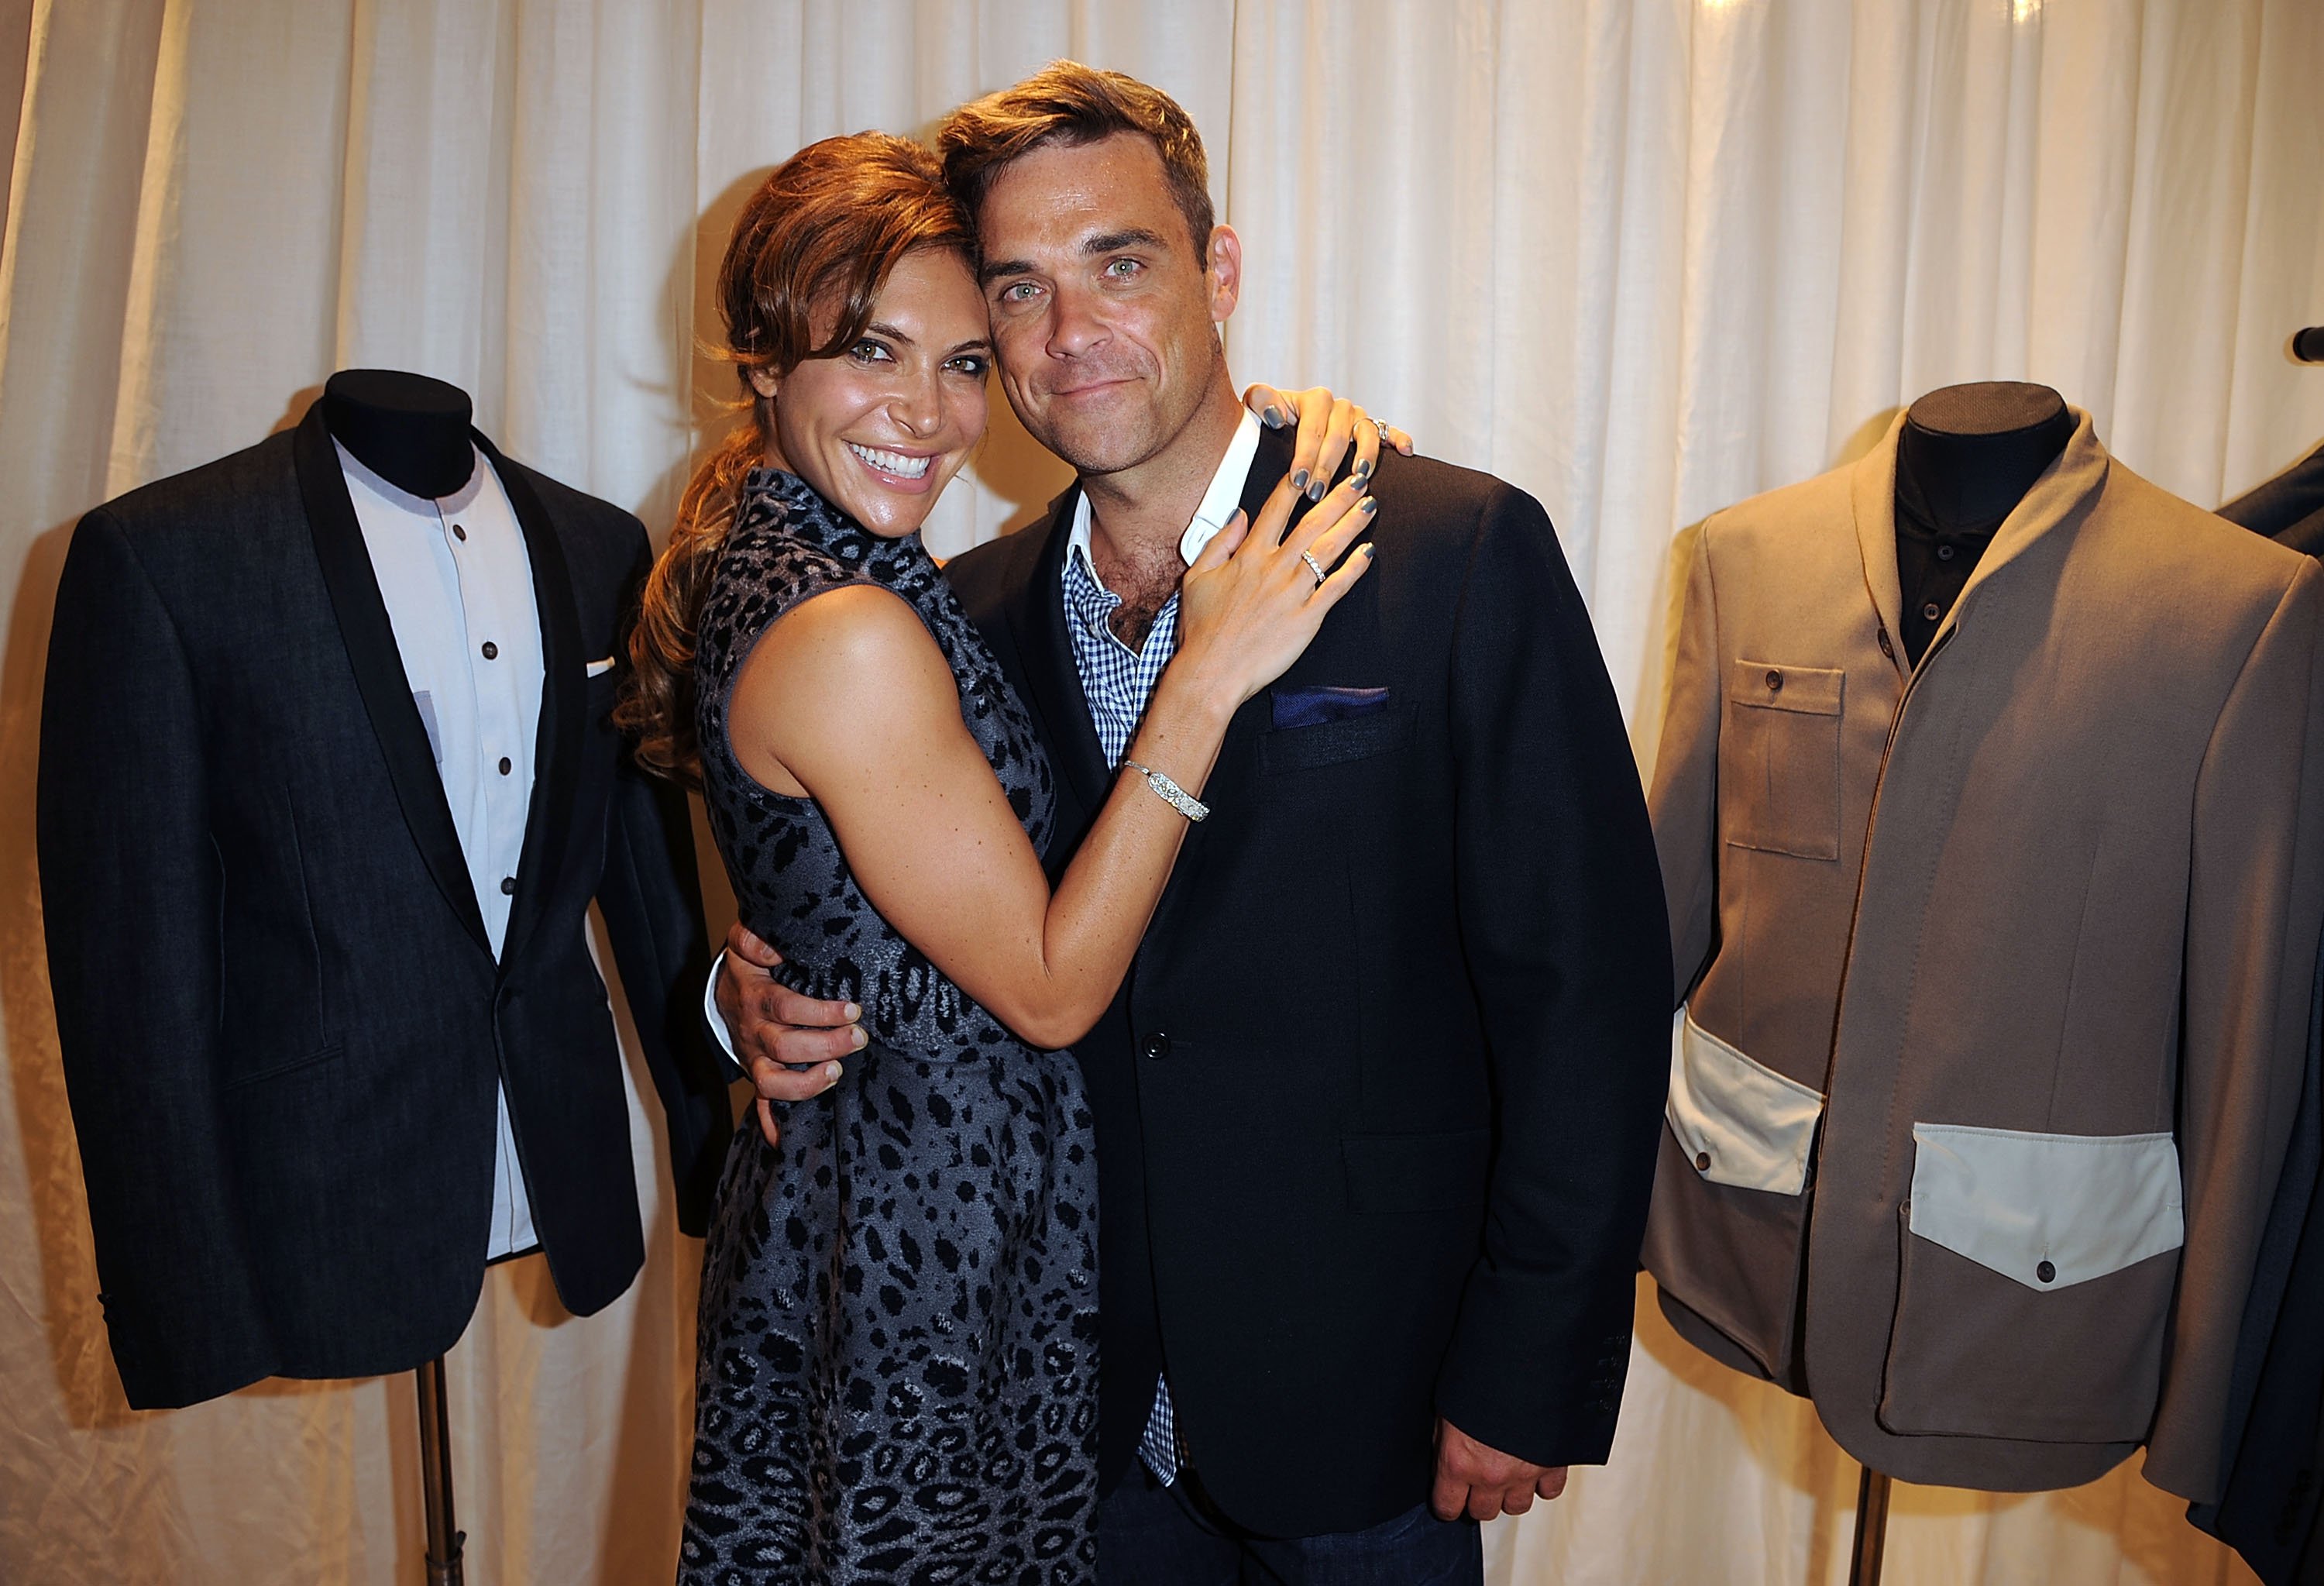 Robbie Williams and wife, Ayda Field, attend the launch of the Spencer Hart flagship store on September 16, 2011 in London, England | Source: Getty Images